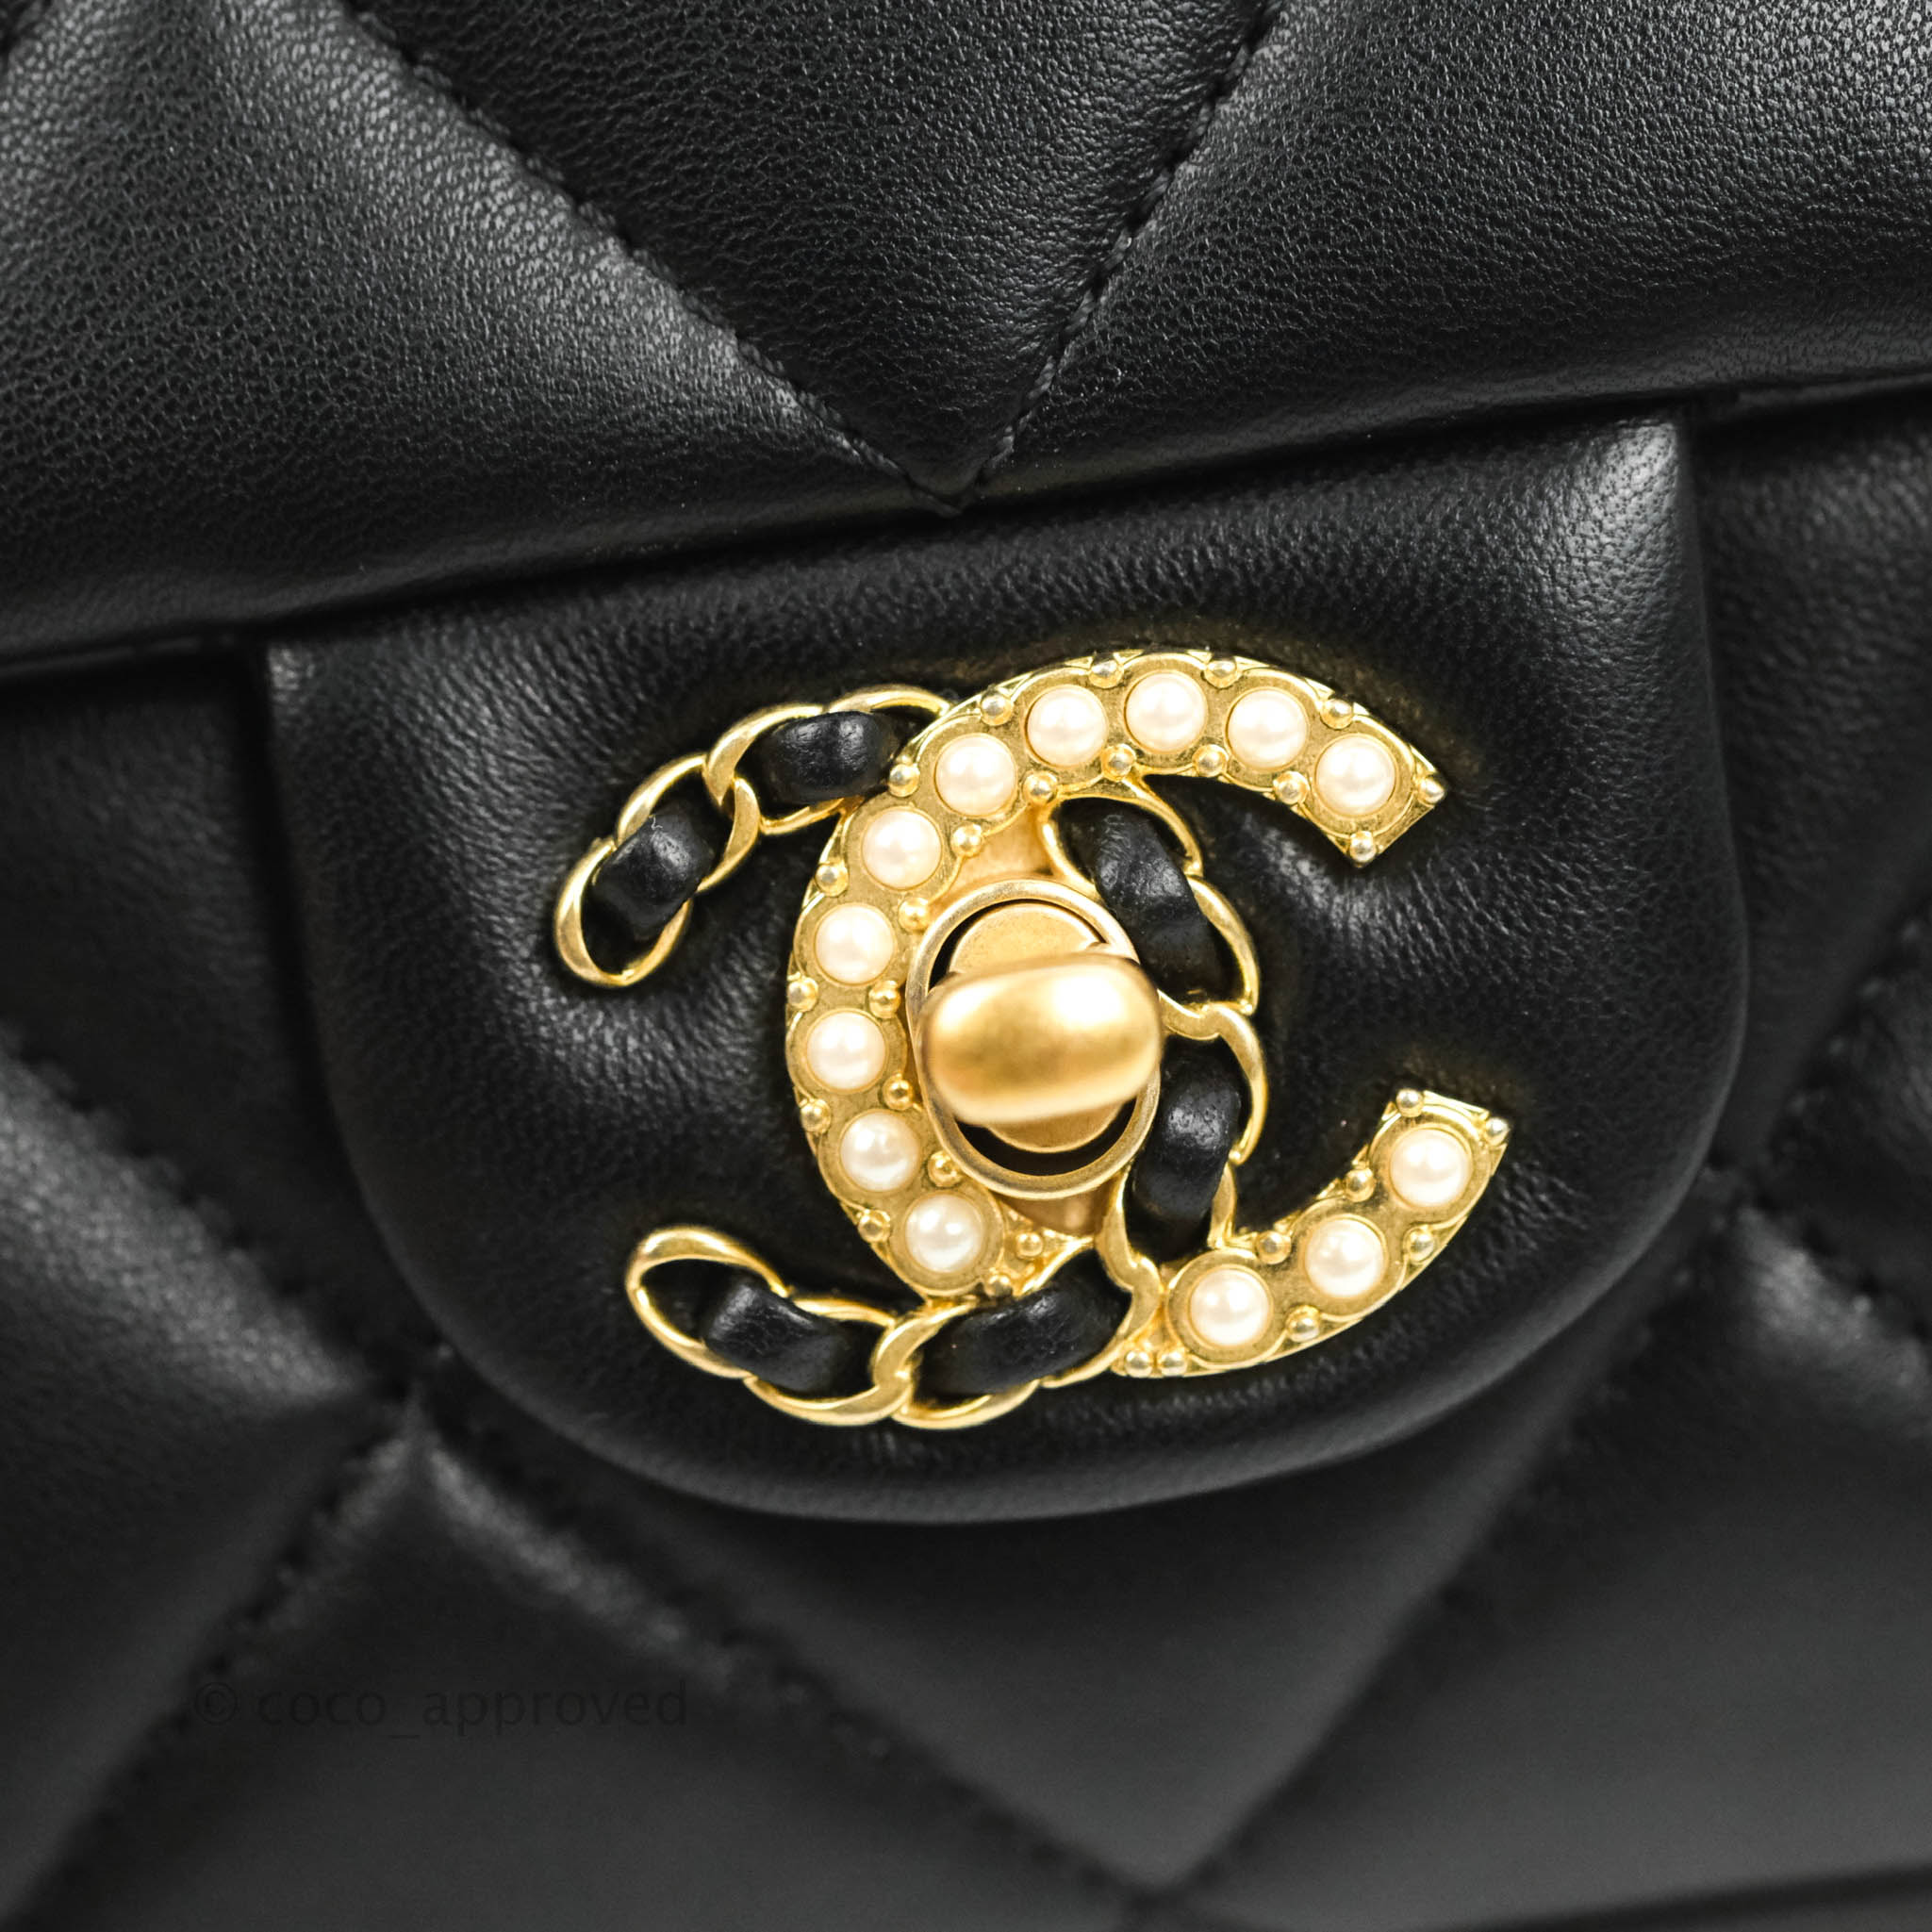 Chanel Flap Bag with Adjustable Strap Dark Brown Lambskin Aged Gold Ha –  Coco Approved Studio